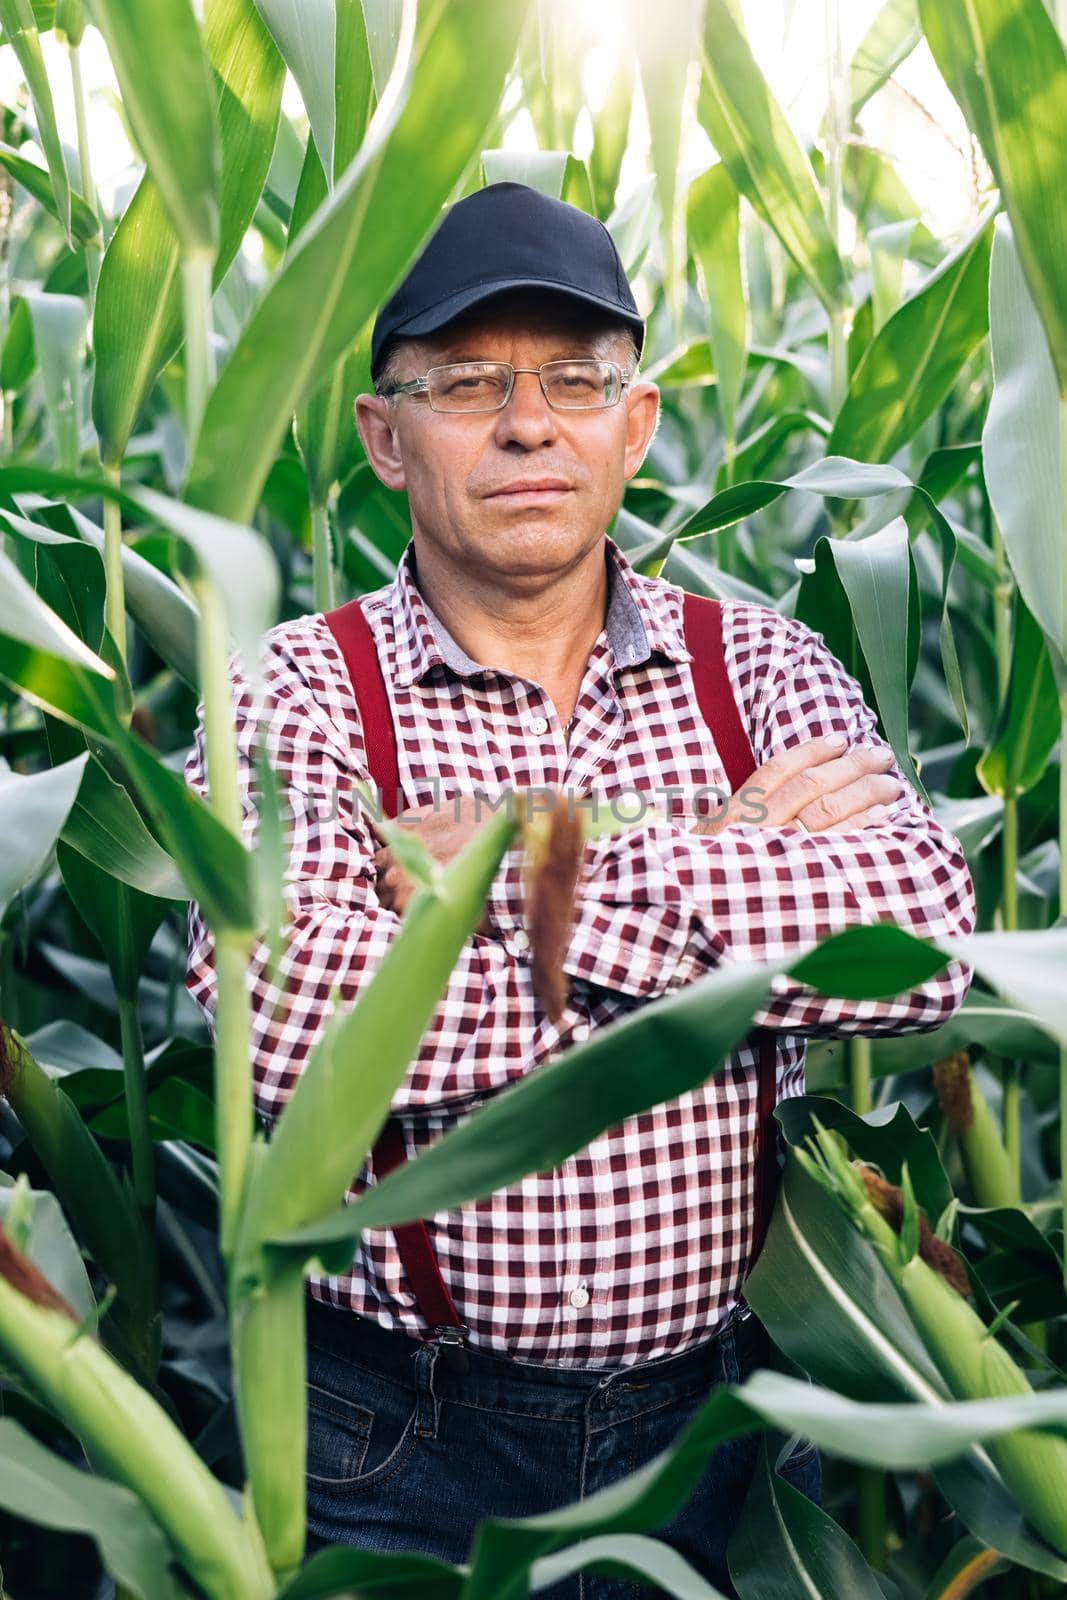 Portrait shot of attractive Caucasian man standing in green corn field, smiling cheerfully to camera. Male farmer with smile outdoors in summer.